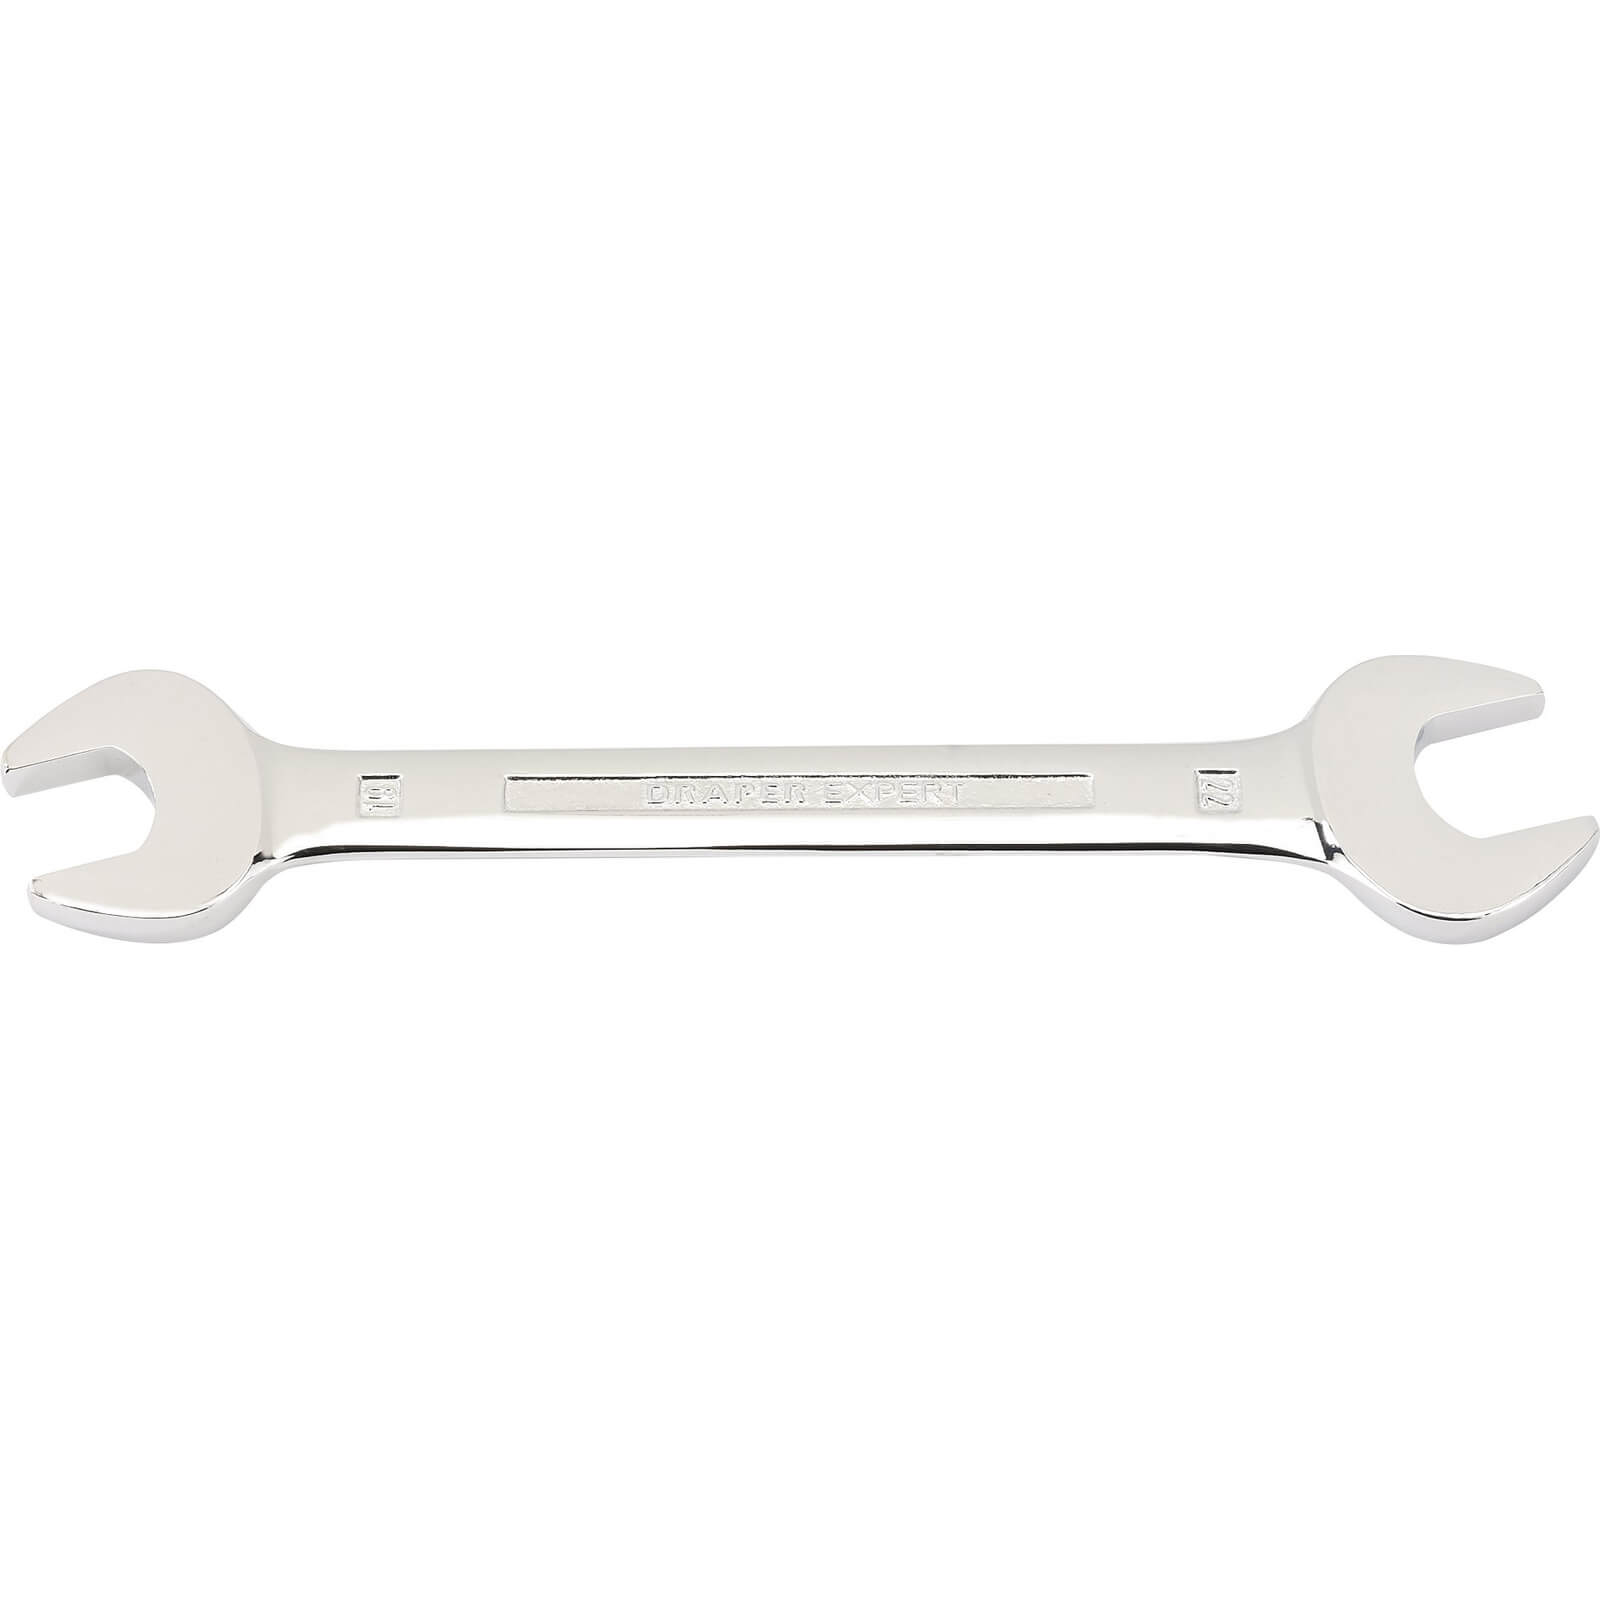 Image of Draper Expert Double Open Ended Spanner Metric 19mm x 22mm